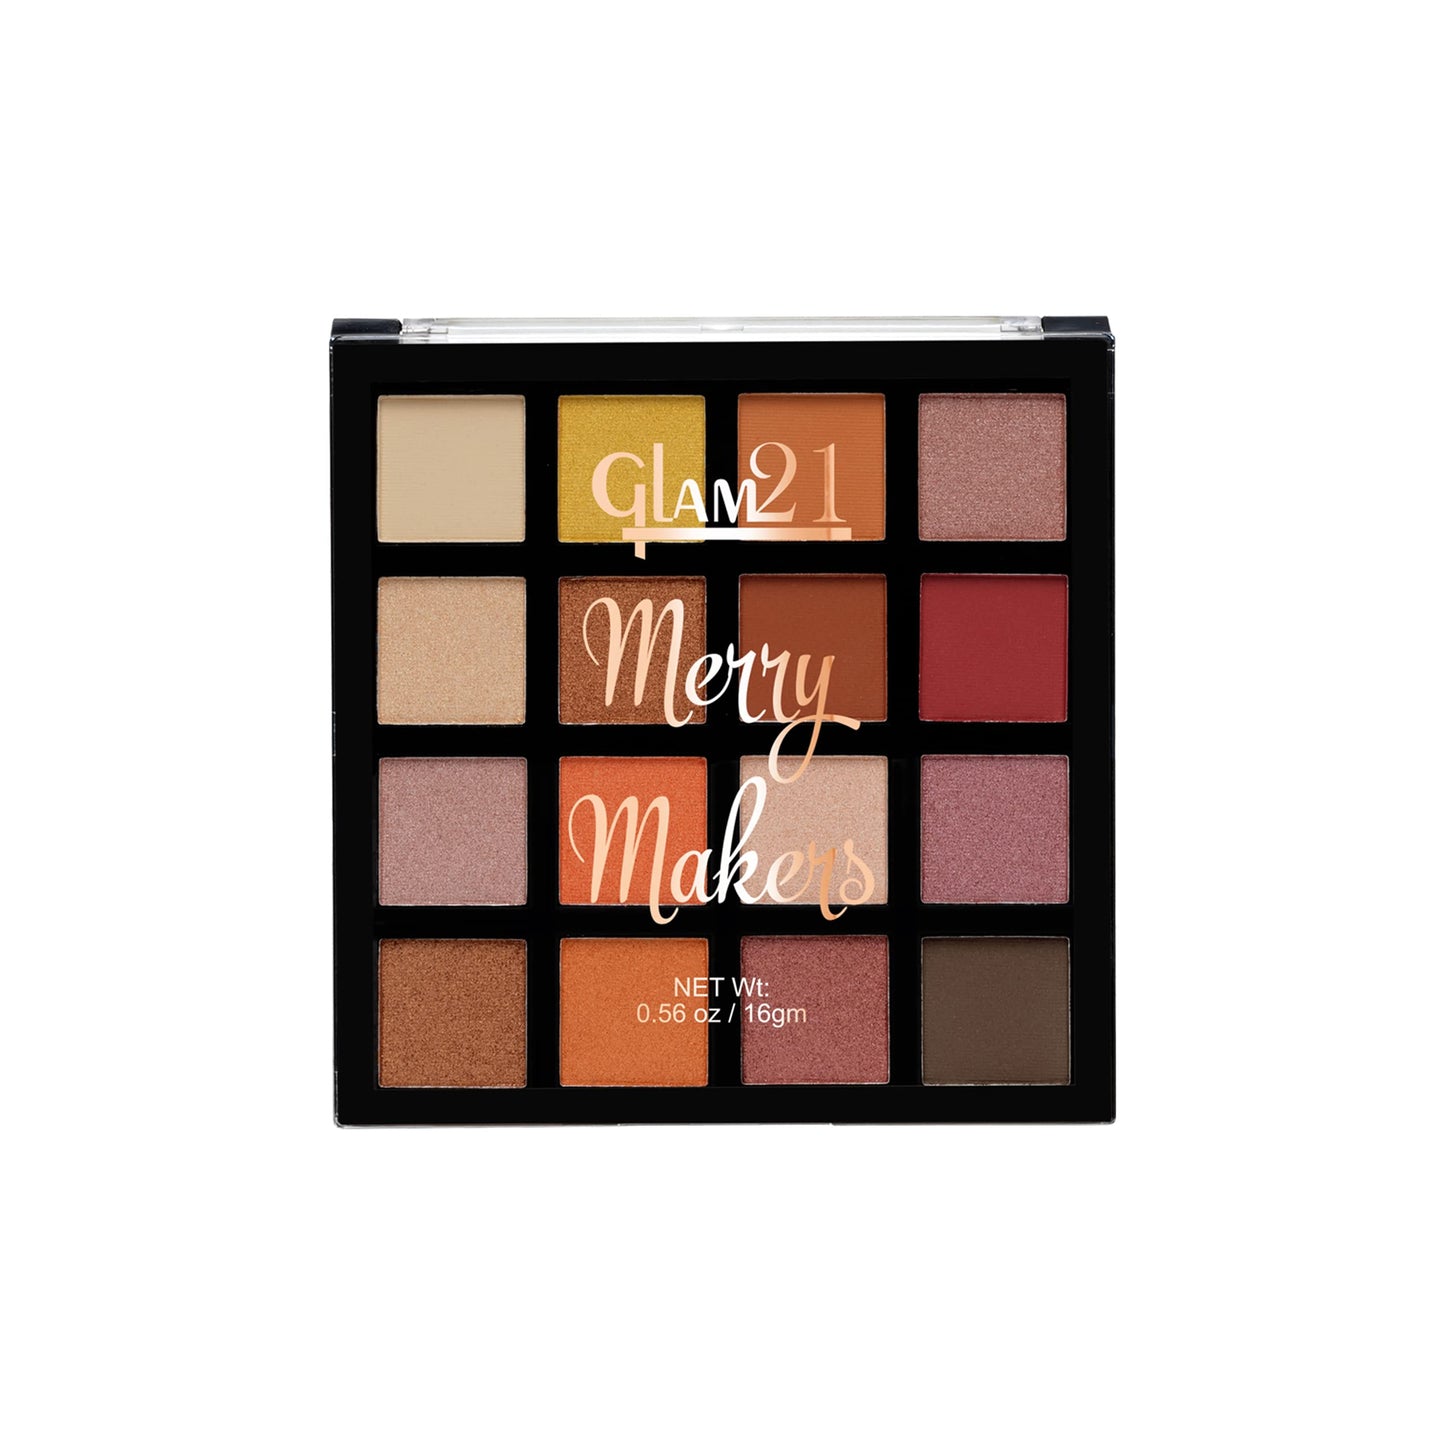 Glam21 Merry Makers Eyeshadow Palette | 16 Highly Pigmented Shades | Seamless Blending| Long-Staying | 16 gm - Shade-02